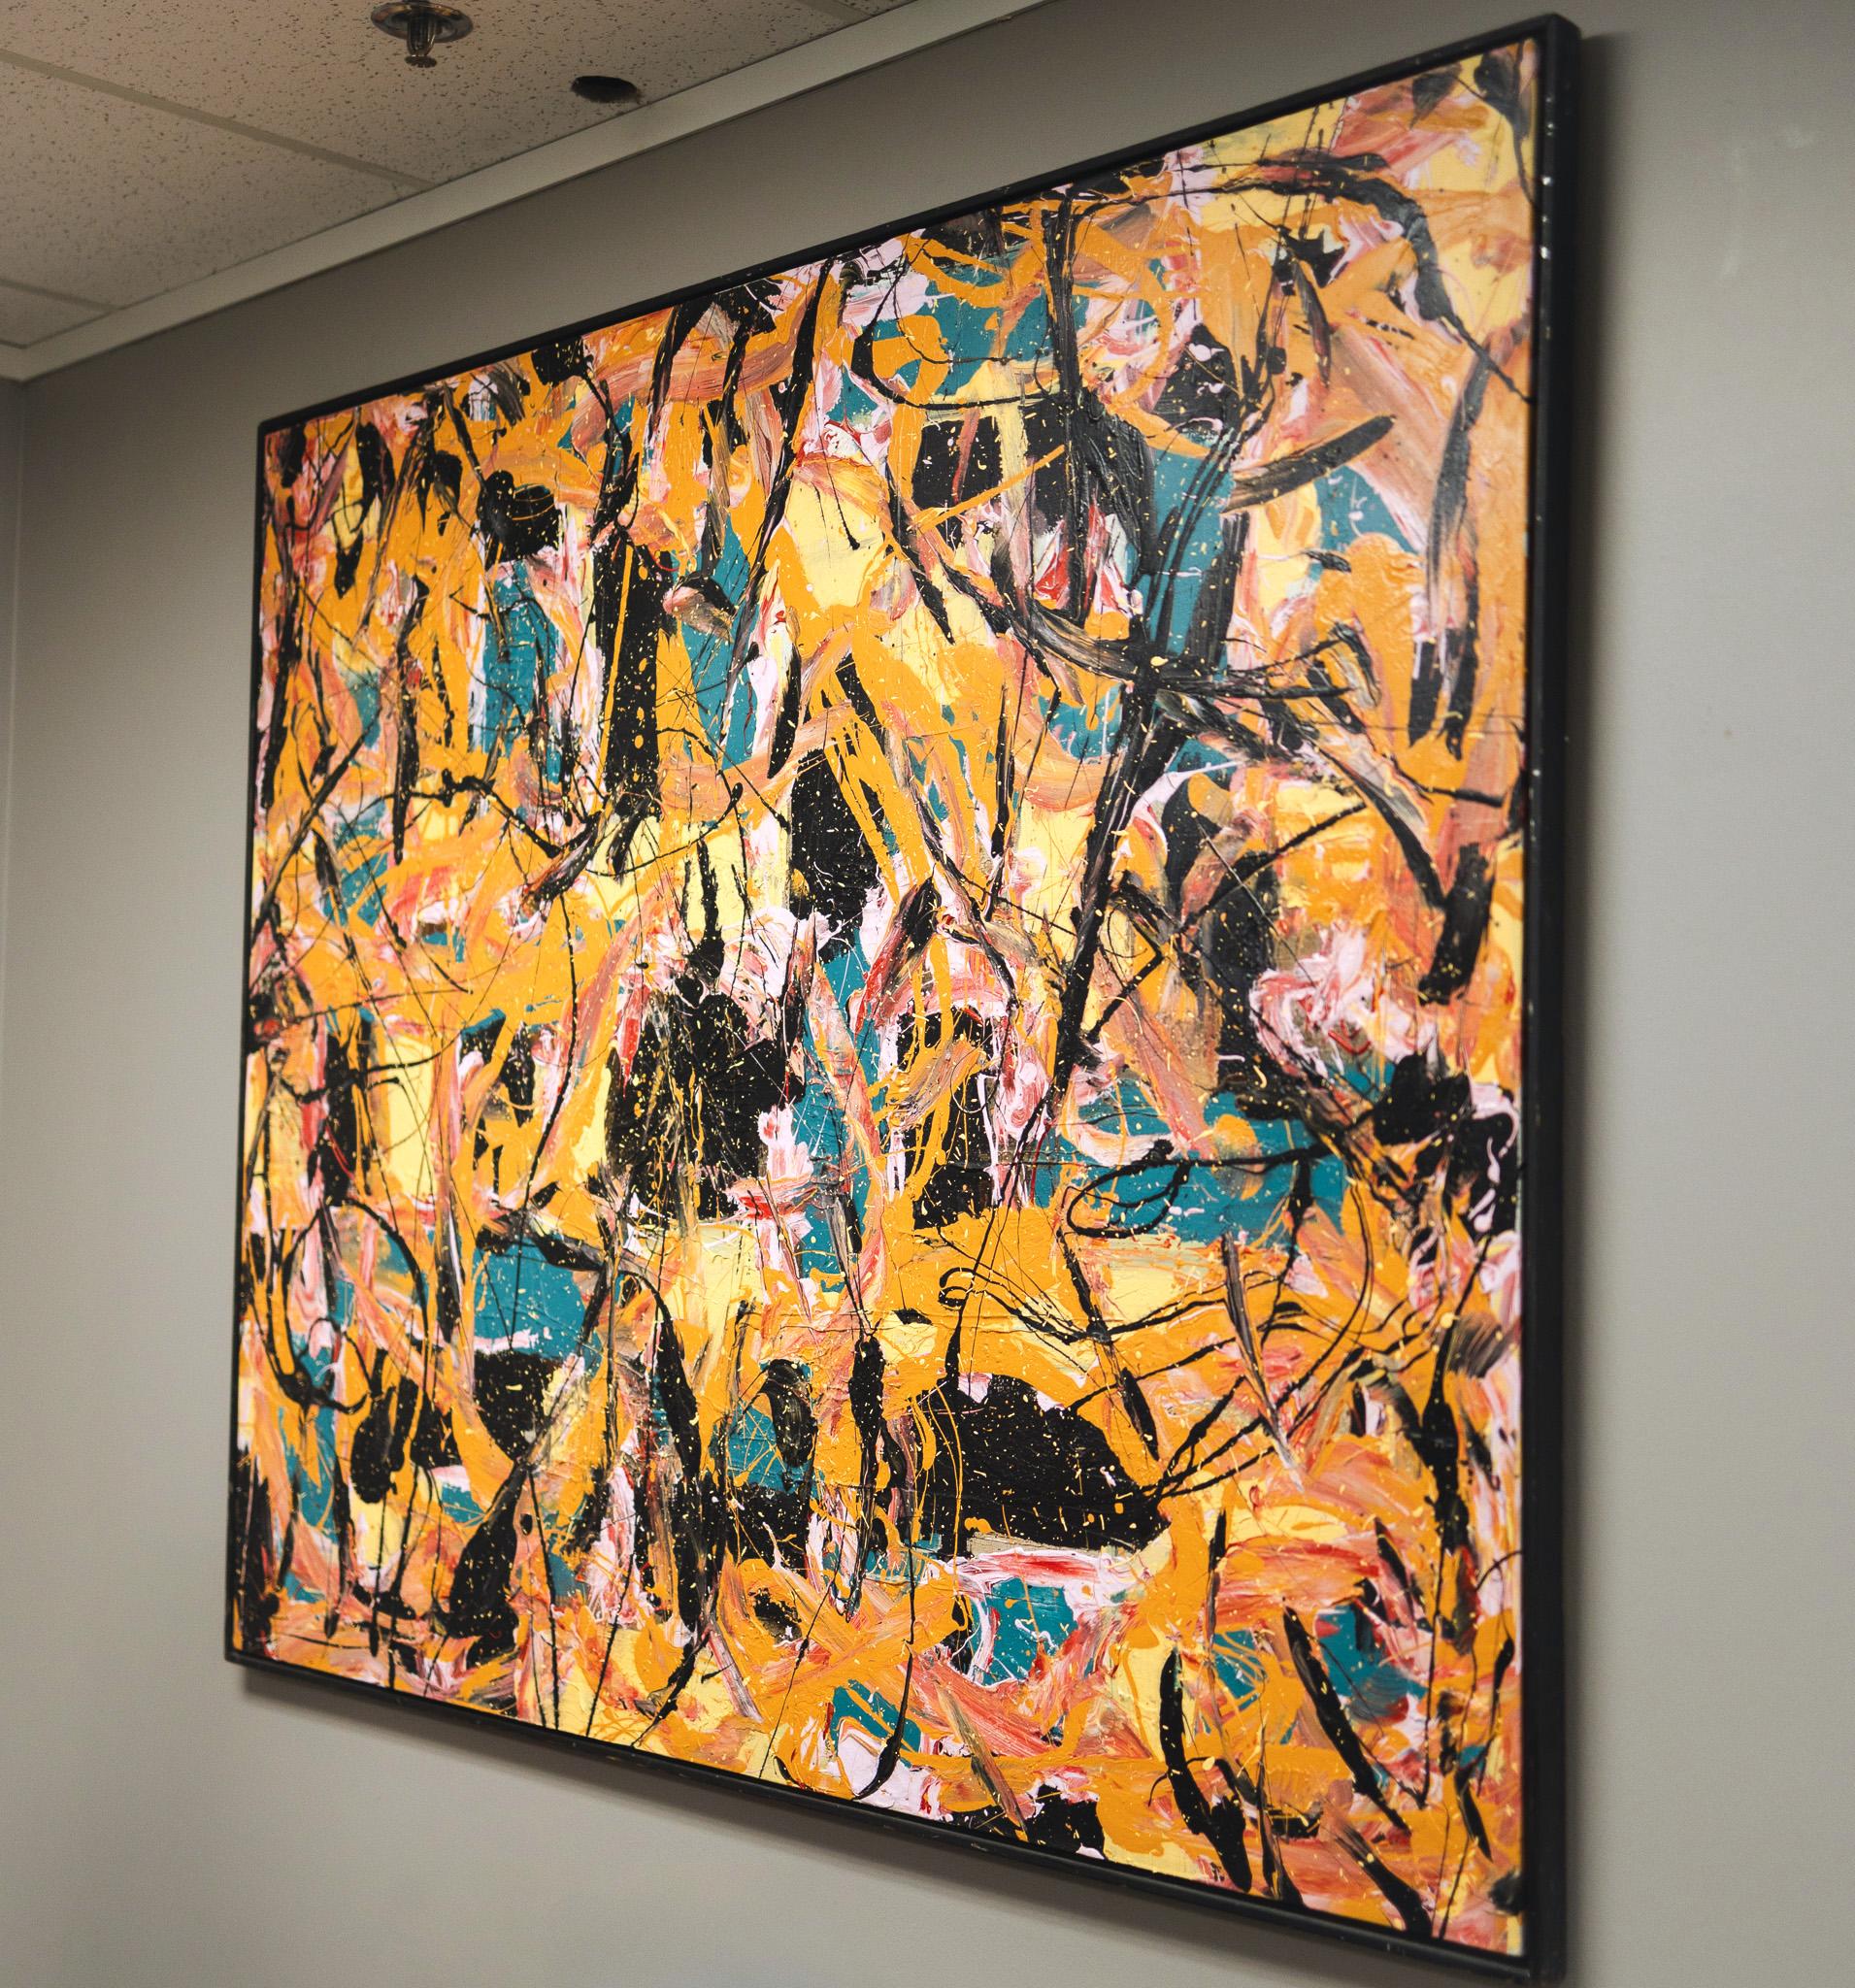 Abstract in Black, Yellow, Orange, Pink, and Teal - Abstract Expressionist Painting by Jack Nichols